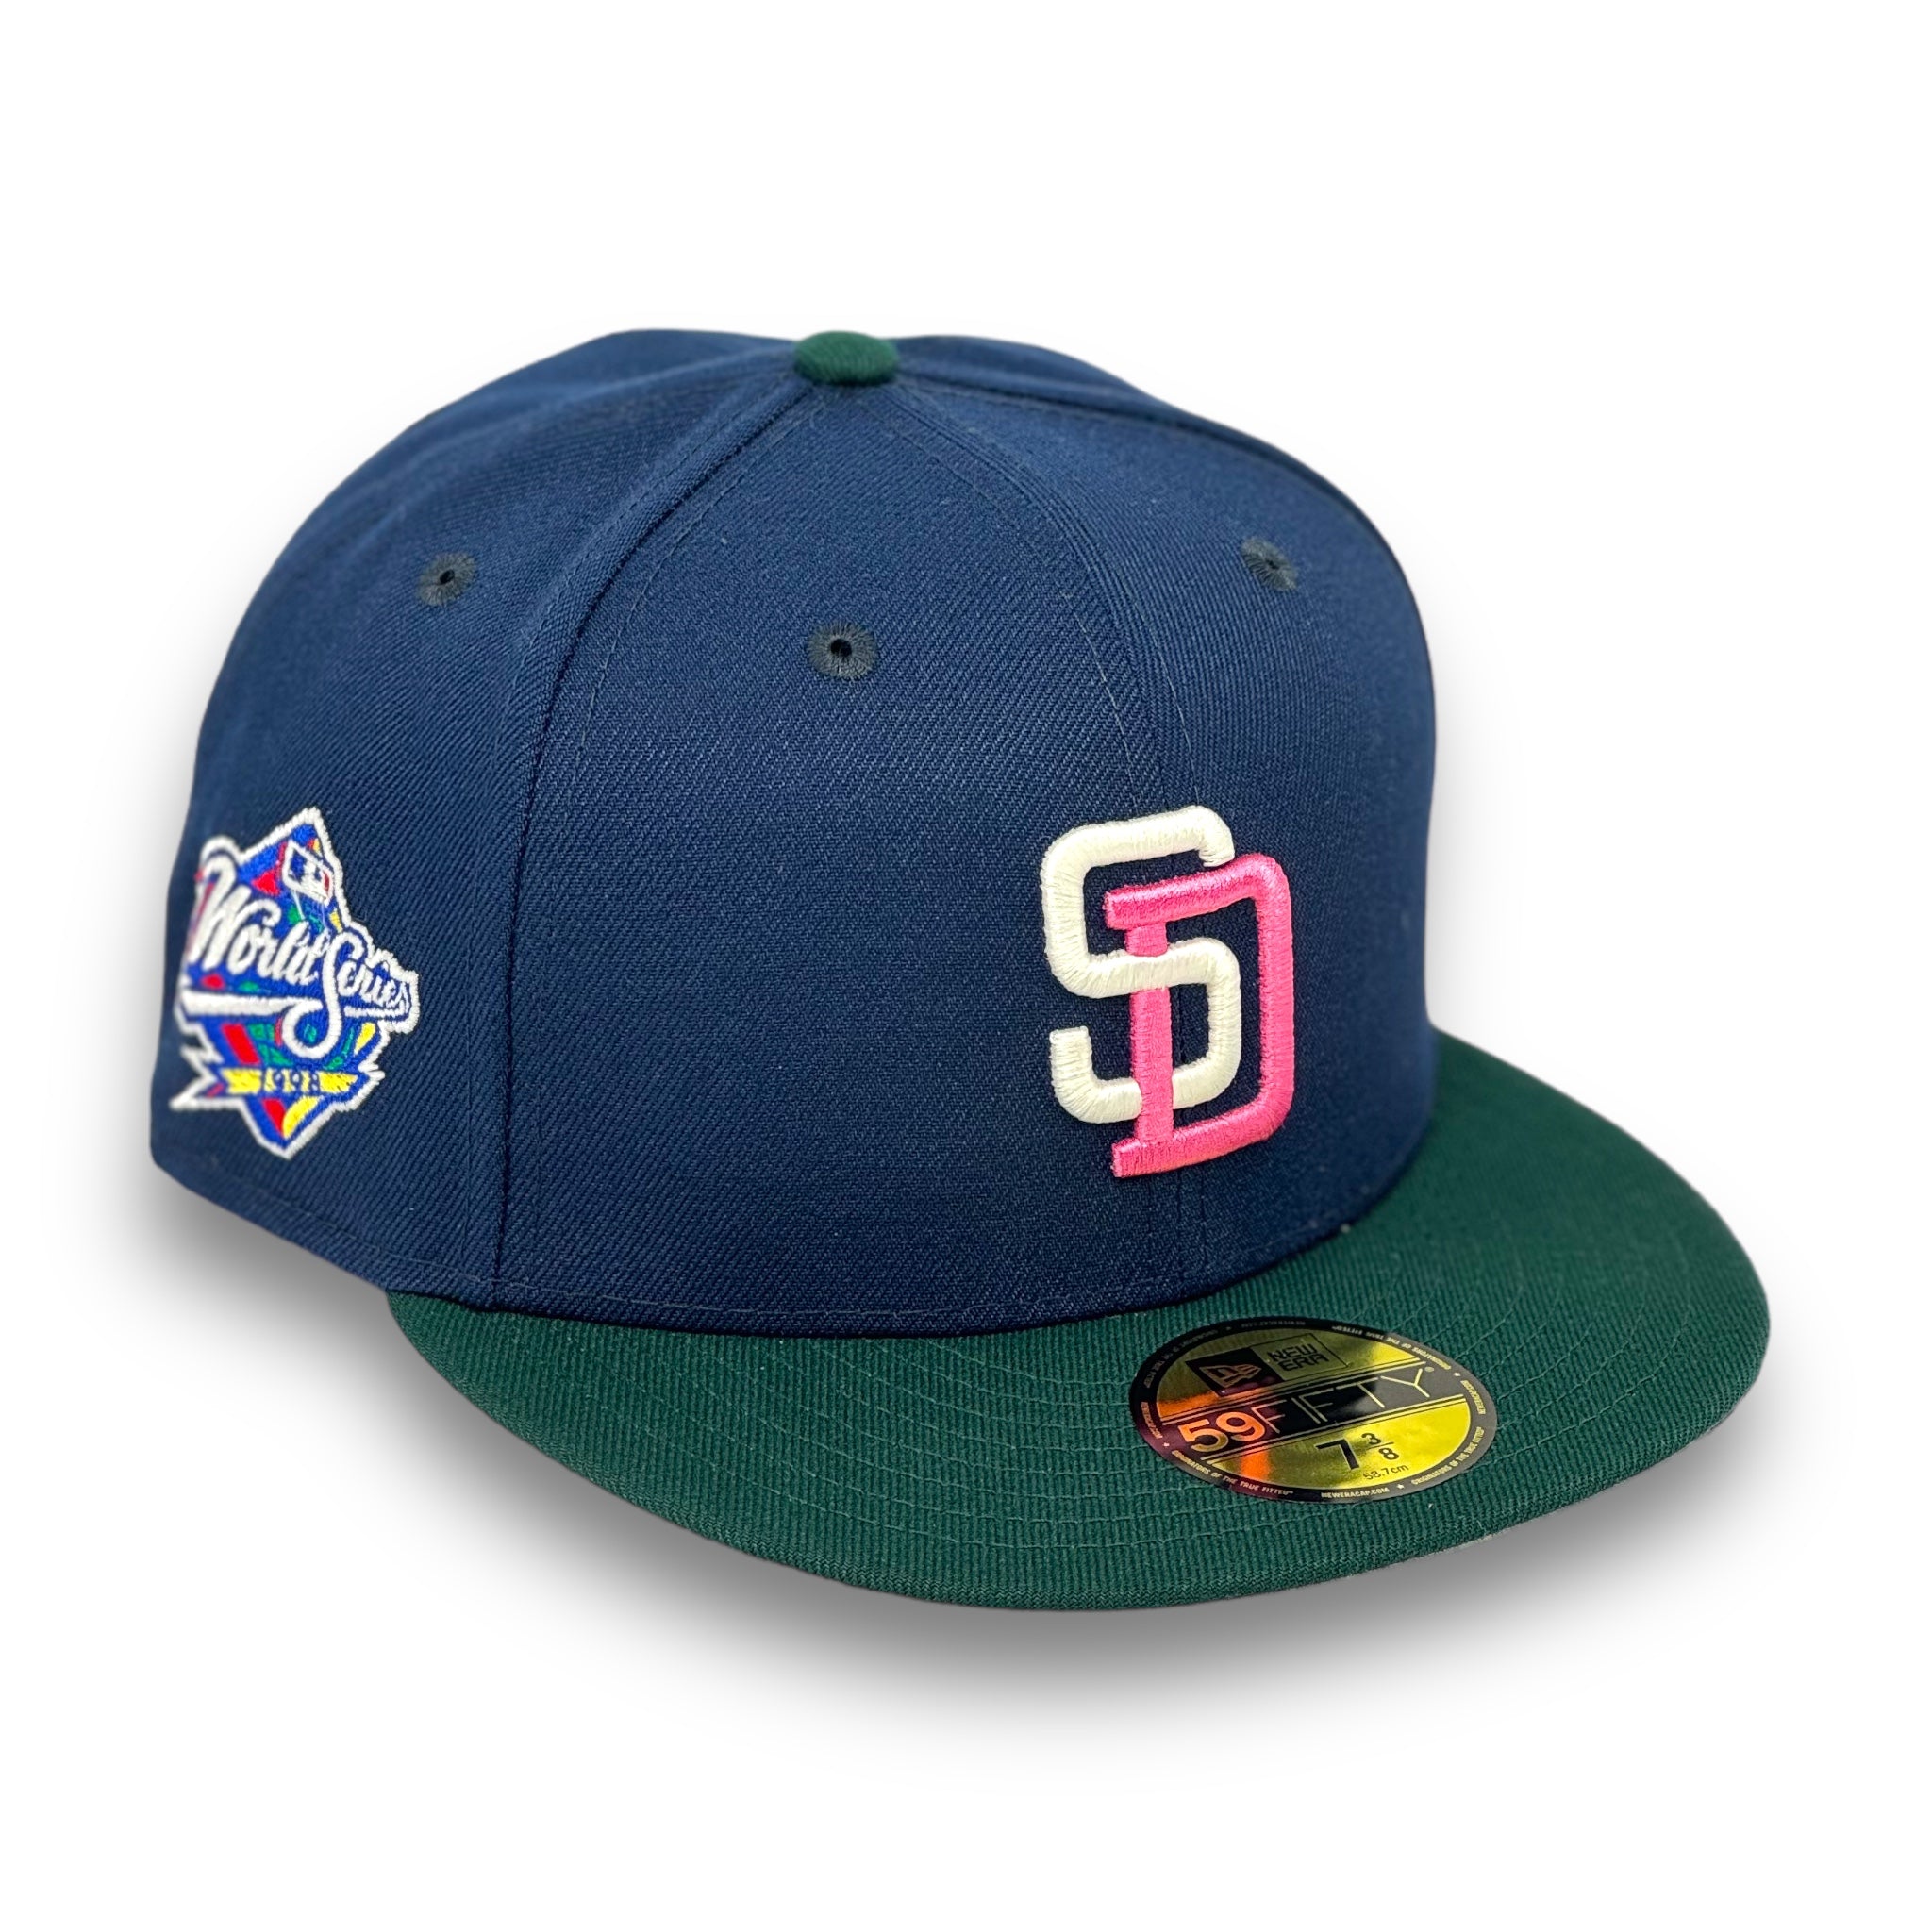 SAN DIEGO PADRES (NAVY/GREEN) (1998 WORLD SERIES) NEW ERA 59FIFTY FITTED